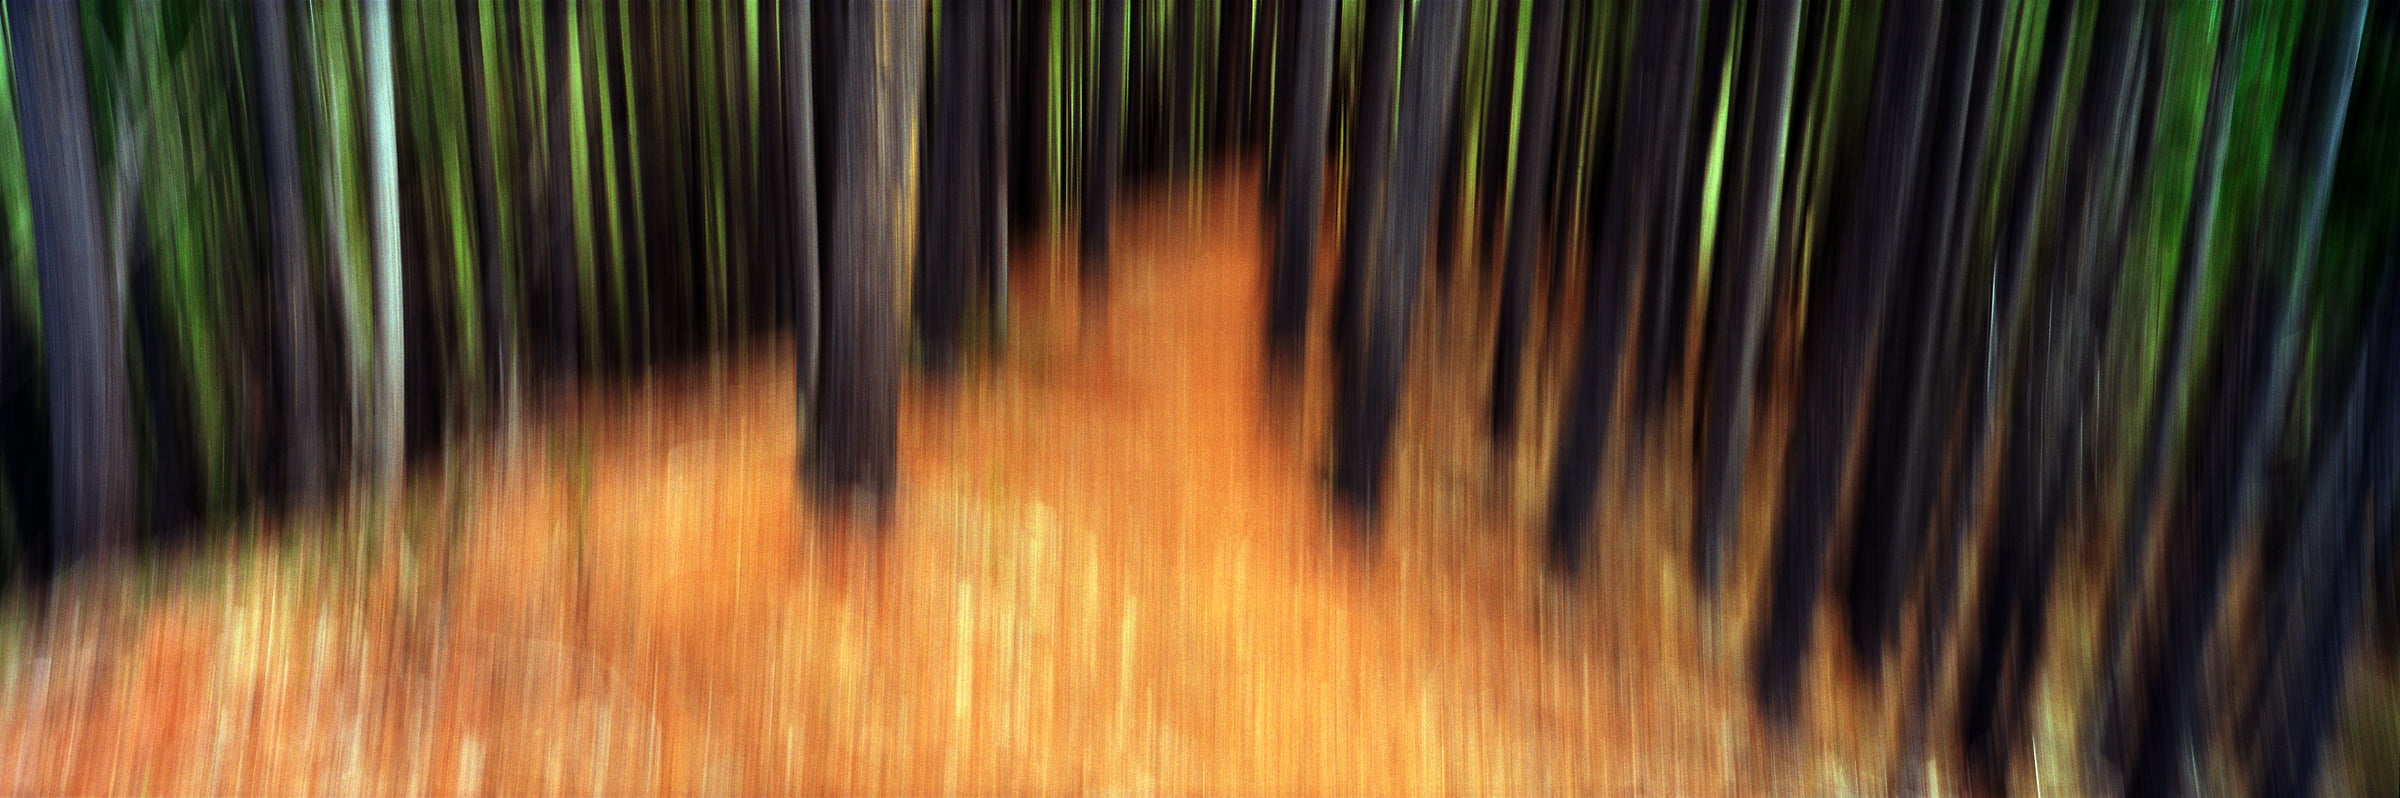 336 megapixels! A very high resolution, large-format VAST photo print of a forest in an abstract style; fine art photograph created by Scott Dimond in Kimberley, British Columbia, Canada